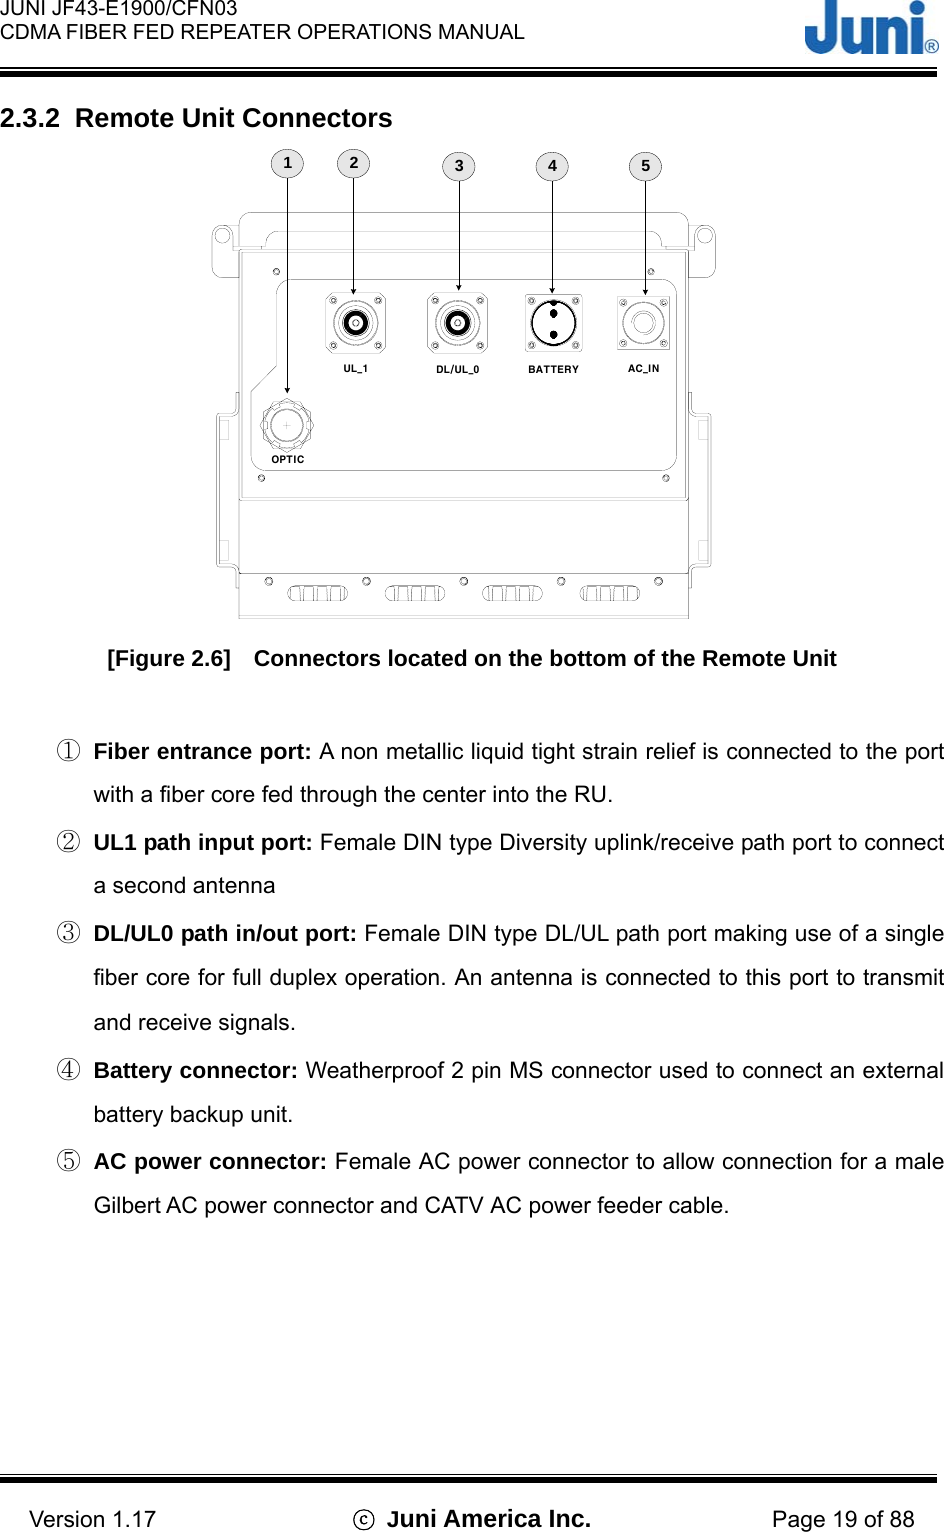  JUNI JF43-E1900/CFN03 CDMA FIBER FED REPEATER OPERATIONS MANUAL                                    Version 1.17  ⓒ Juni America Inc. Page 19 of 88 2.3.2  Remote Unit Connectors BATTERYOPTICUL_1 DL/UL_0 AC_IN1 2 345 [Figure 2.6]    Connectors located on the bottom of the Remote Unit  ①  Fiber entrance port: A non metallic liquid tight strain relief is connected to the port with a fiber core fed through the center into the RU. ②  UL1 path input port: Female DIN type Diversity uplink/receive path port to connect a second antenna ③  DL/UL0 path in/out port: Female DIN type DL/UL path port making use of a single fiber core for full duplex operation. An antenna is connected to this port to transmit and receive signals. ④  Battery connector: Weatherproof 2 pin MS connector used to connect an external battery backup unit. ⑤  AC power connector: Female AC power connector to allow connection for a male Gilbert AC power connector and CATV AC power feeder cable.  